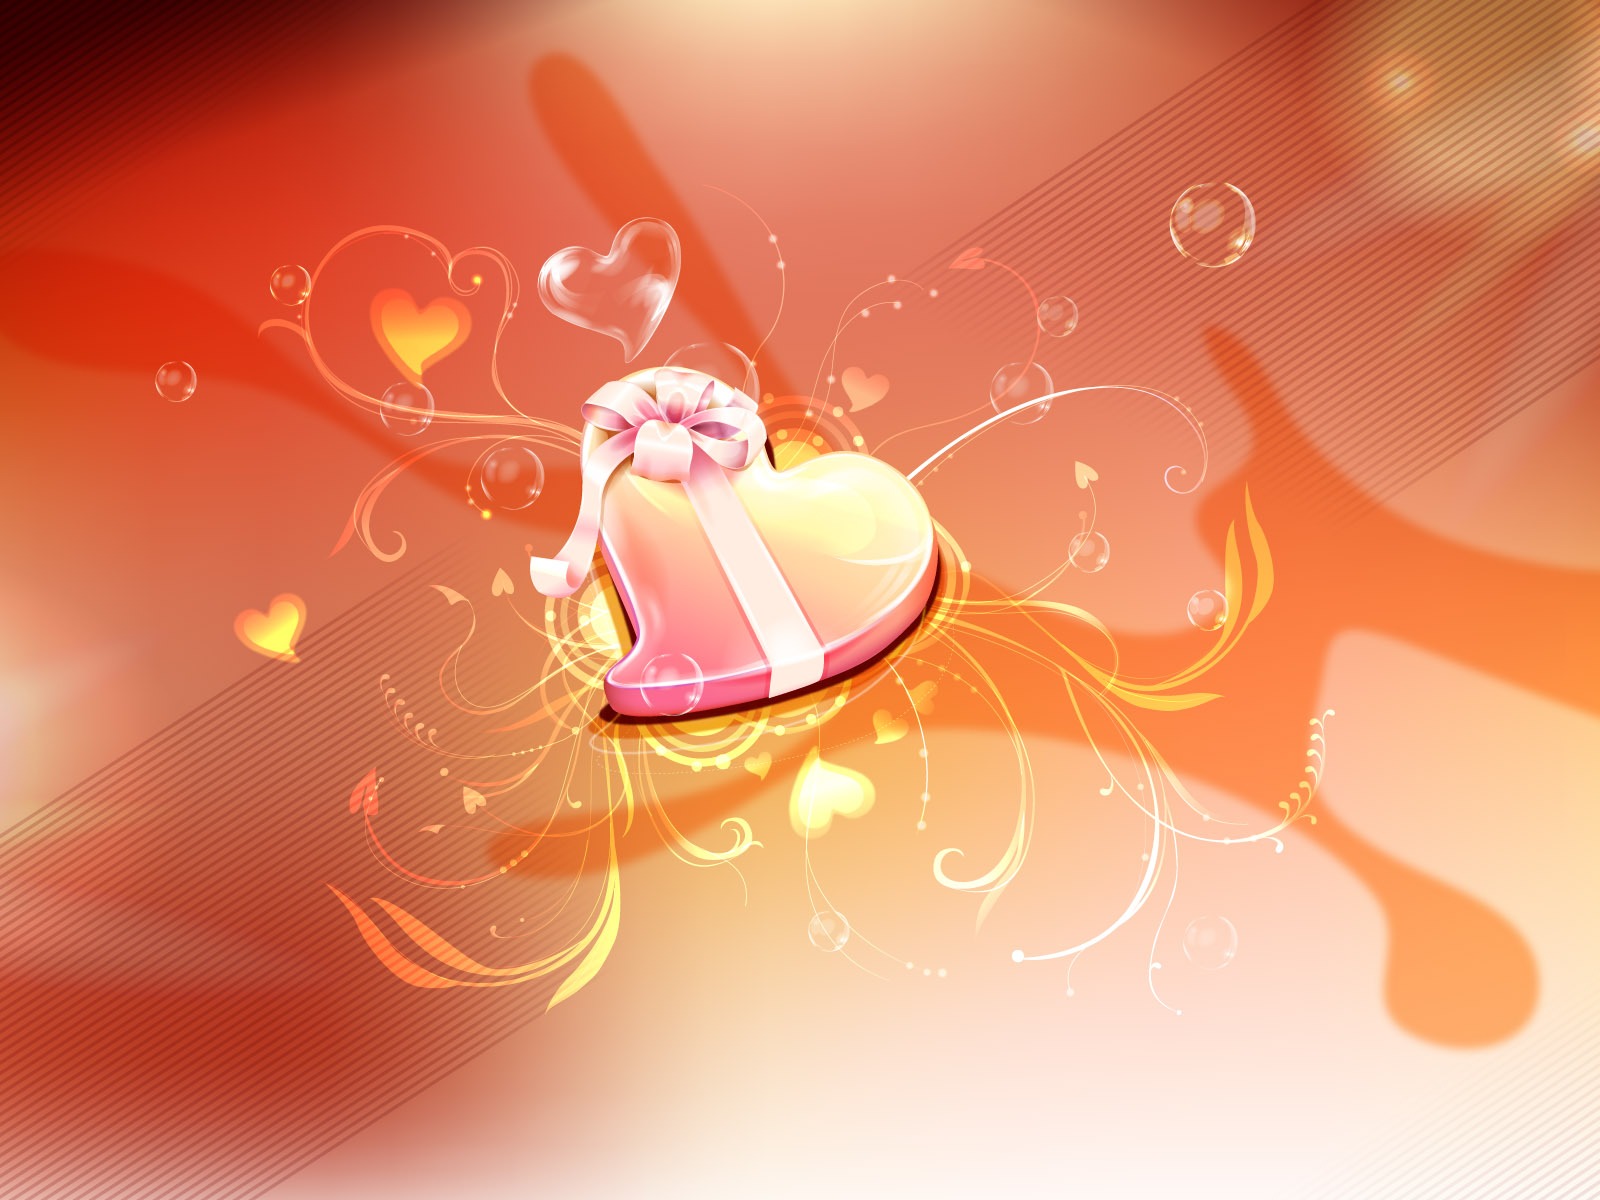 Valentine's Day Love Theme Wallpapers (2) #11 - 1600x1200